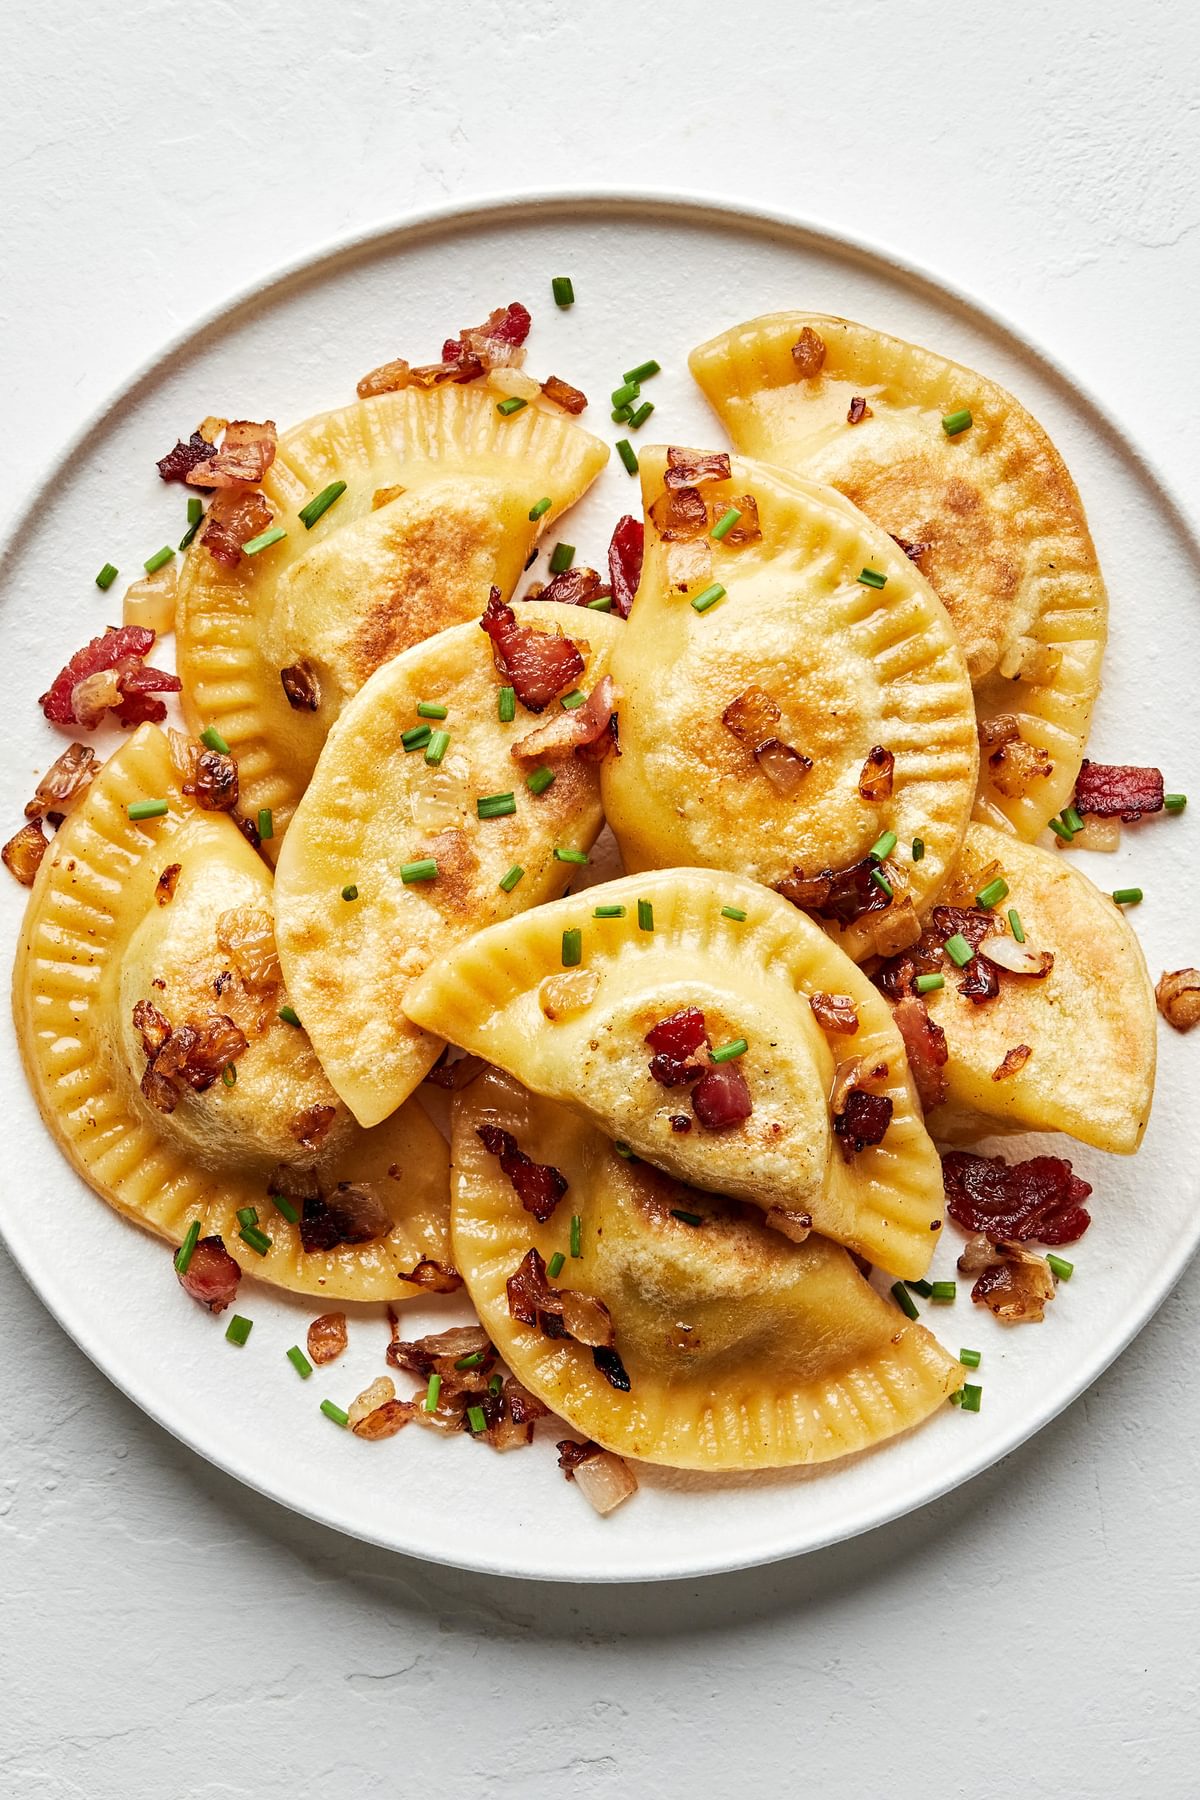 a plate of homemade pierogis: potato filled dumplings boiled then fried in a skillet with onion and bacon